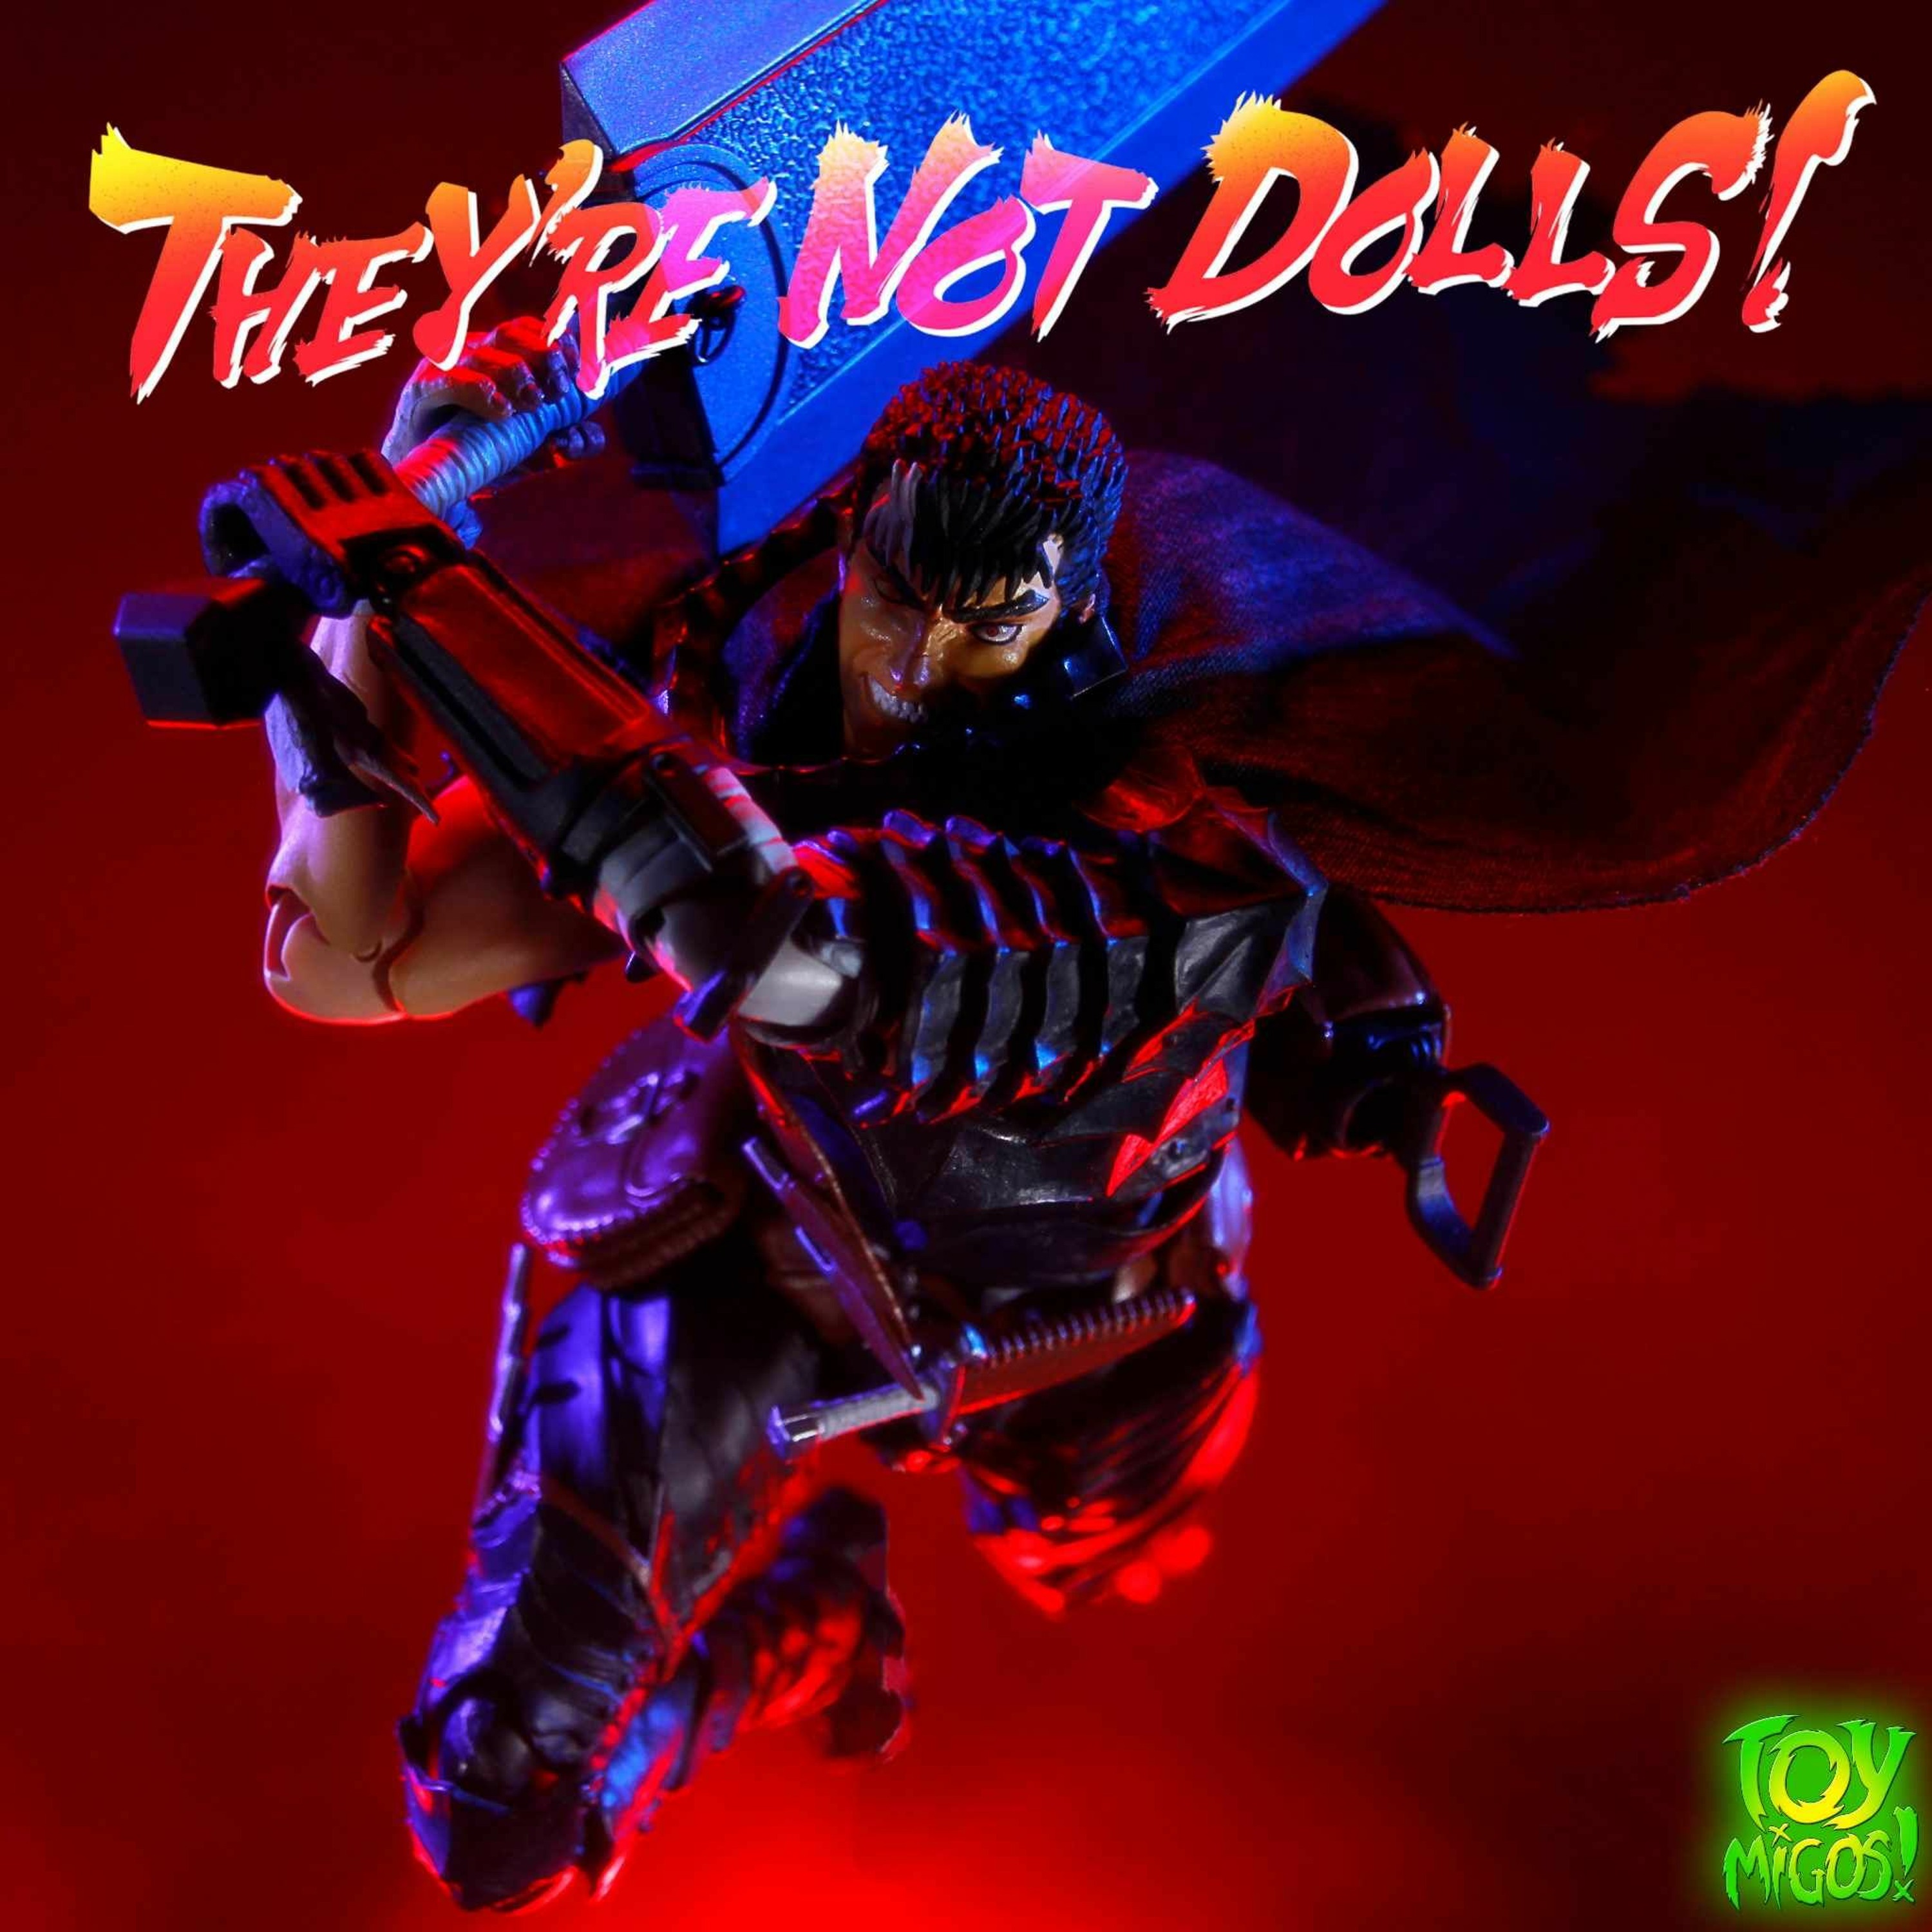 ”They’re not dolls!” Episode 348